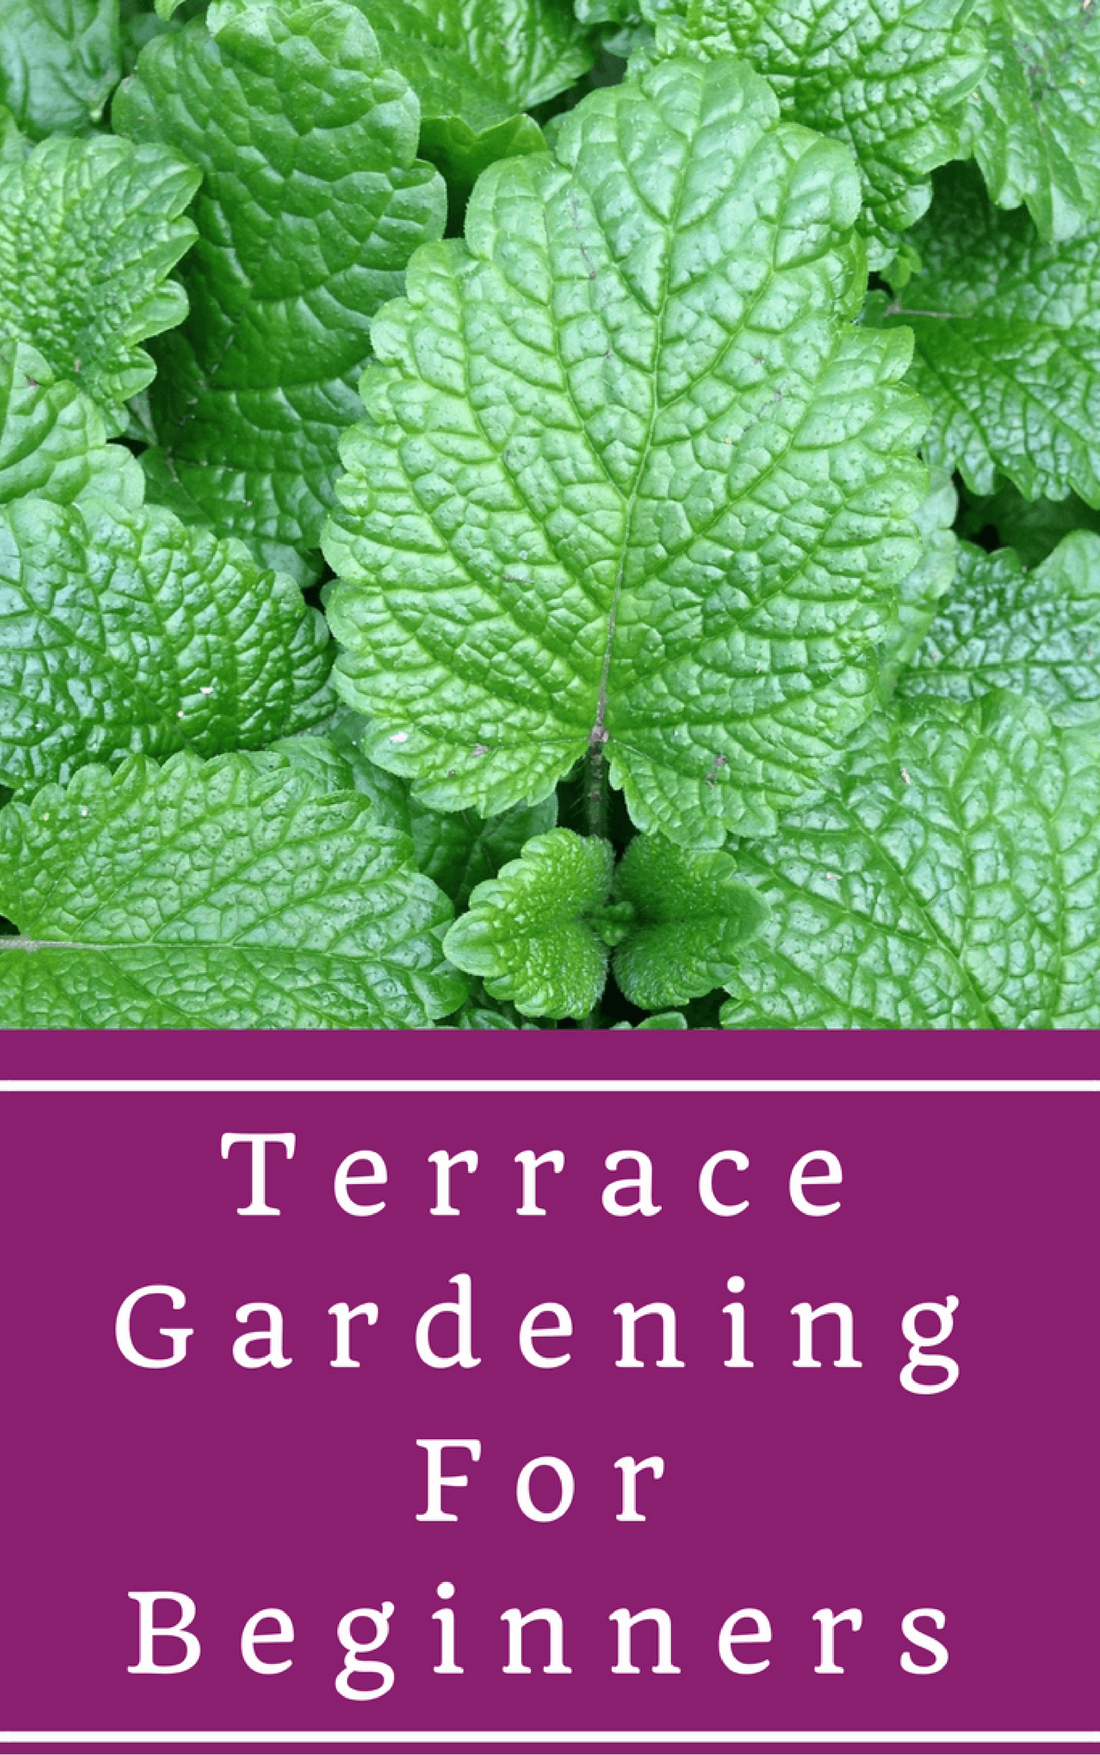 Frequently Asked Questions On Terrace Gardening Methods